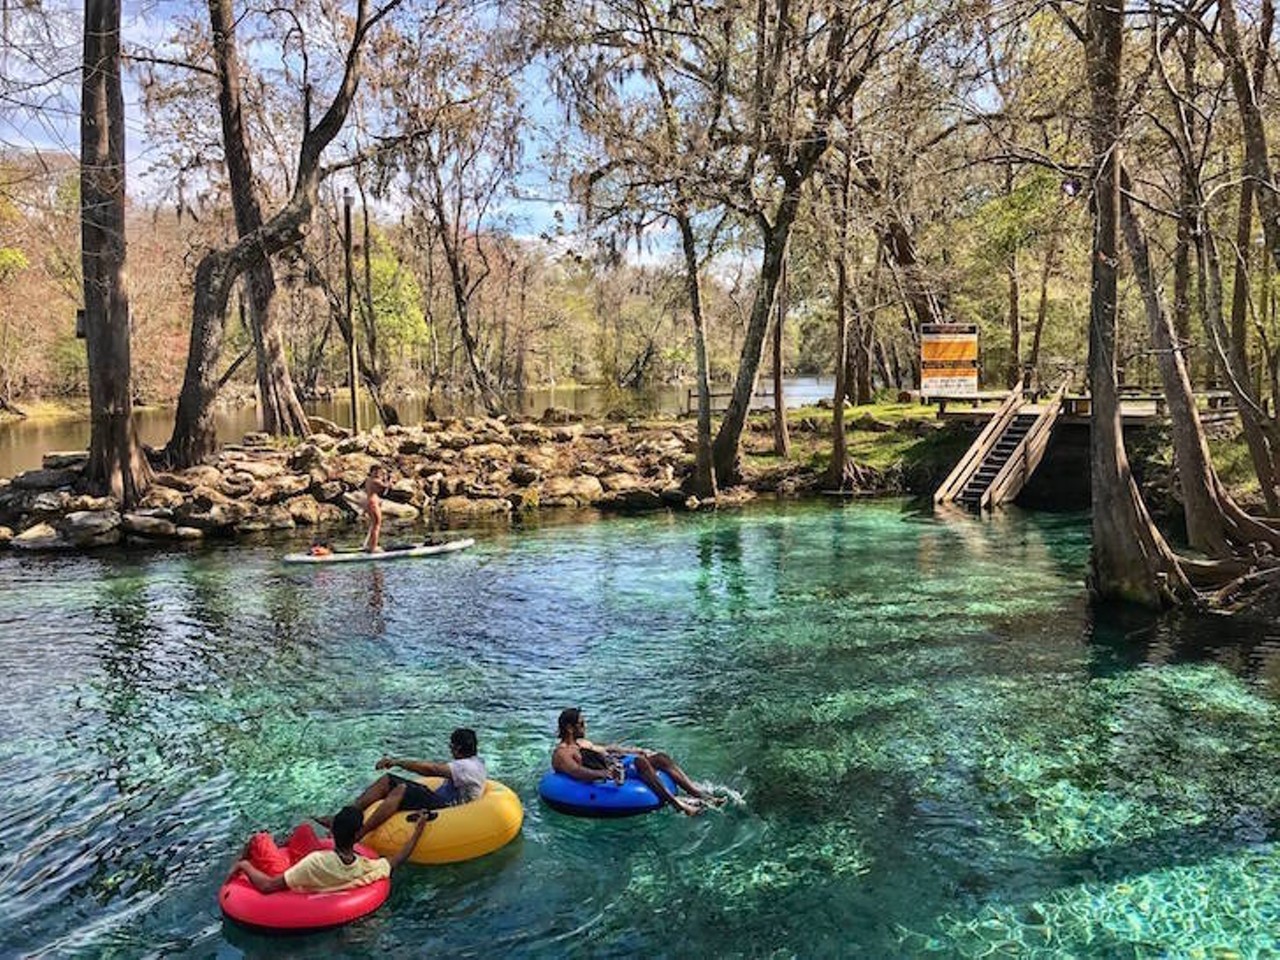 Ginnie Springs Outdoors  
7300 Ginnie Springs Road, 386-454-7188
The water is so clear, and the air is so fresh. This is one of the few springs that allows booze, but it&#146;s BYOB at this wonderful place, just make sure you pack the lunchables and swimsuits for the kiddies.
Photo via Ginnie Springs via Facebook